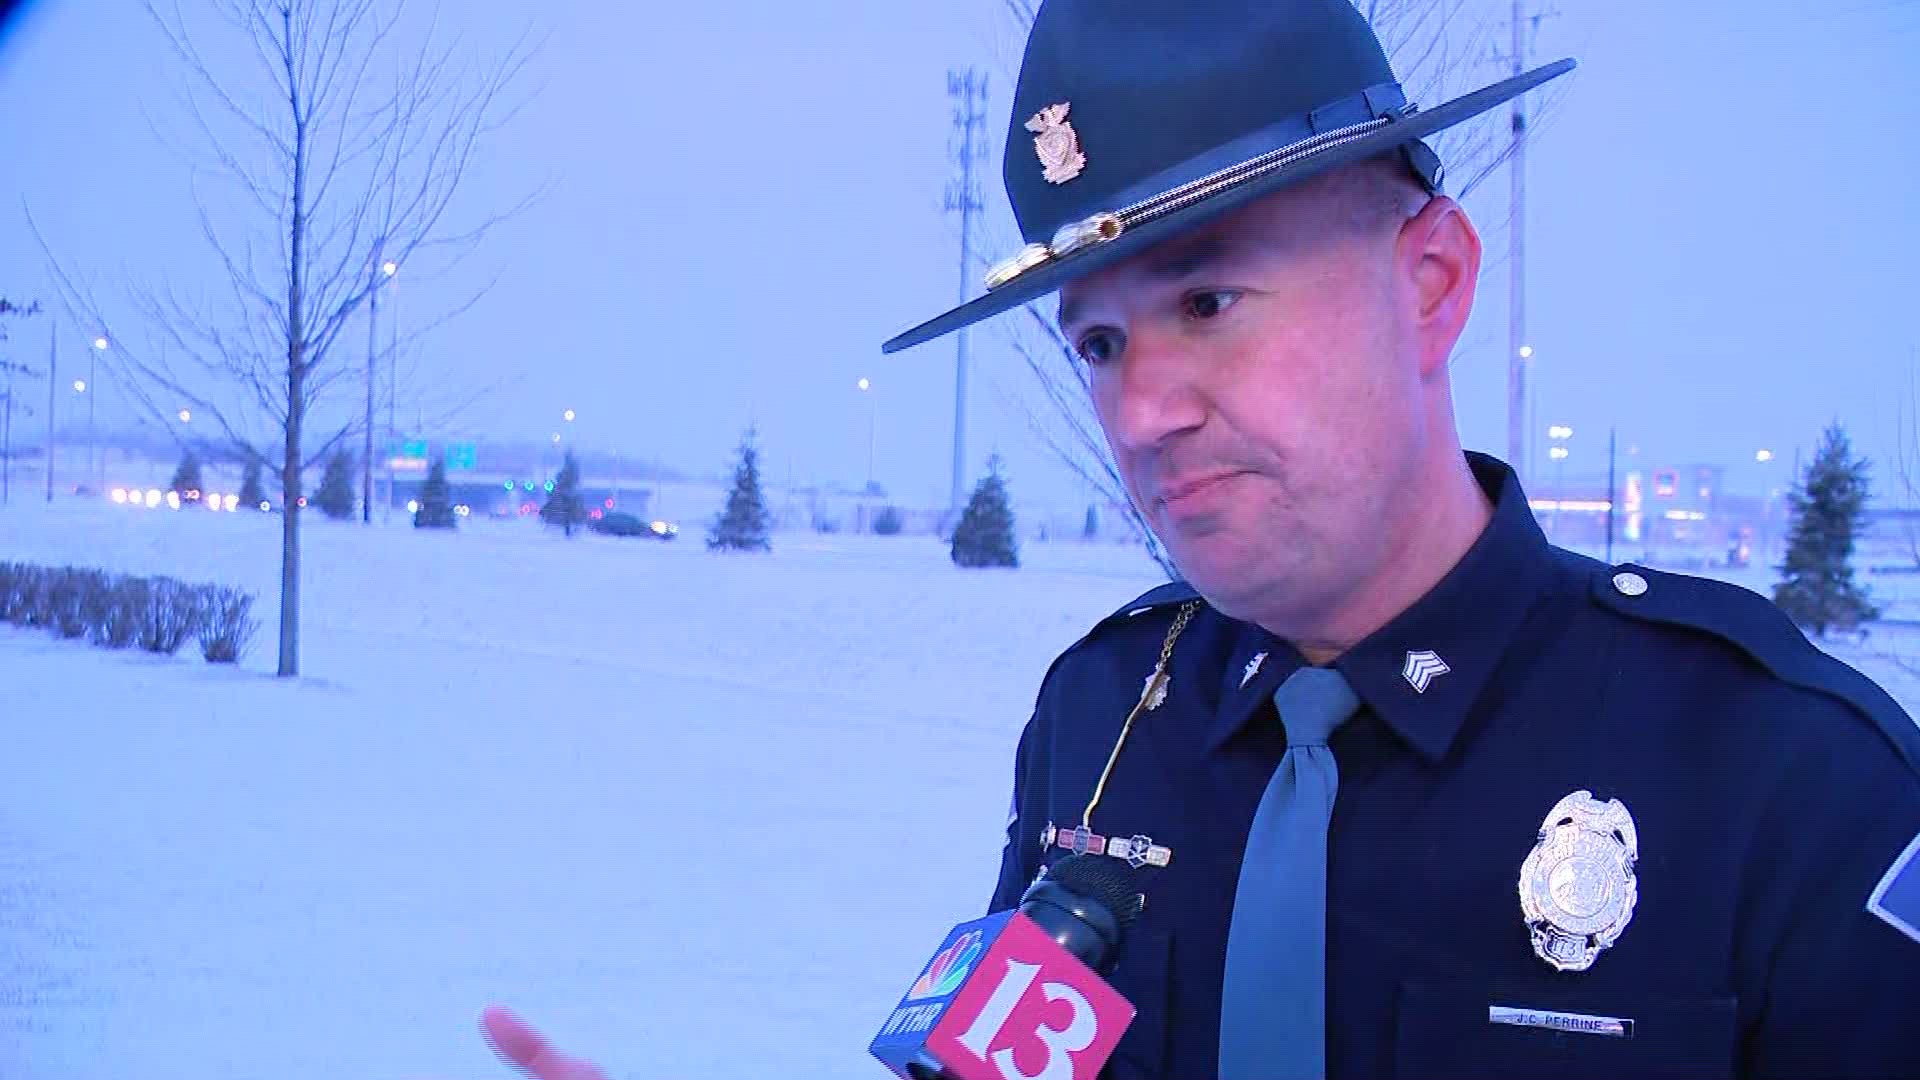 13News' Gina Glaros spoke with ISP Sgt. John Perrine on the conditions on area interstates and tips for avoiding crashes during winter weather.